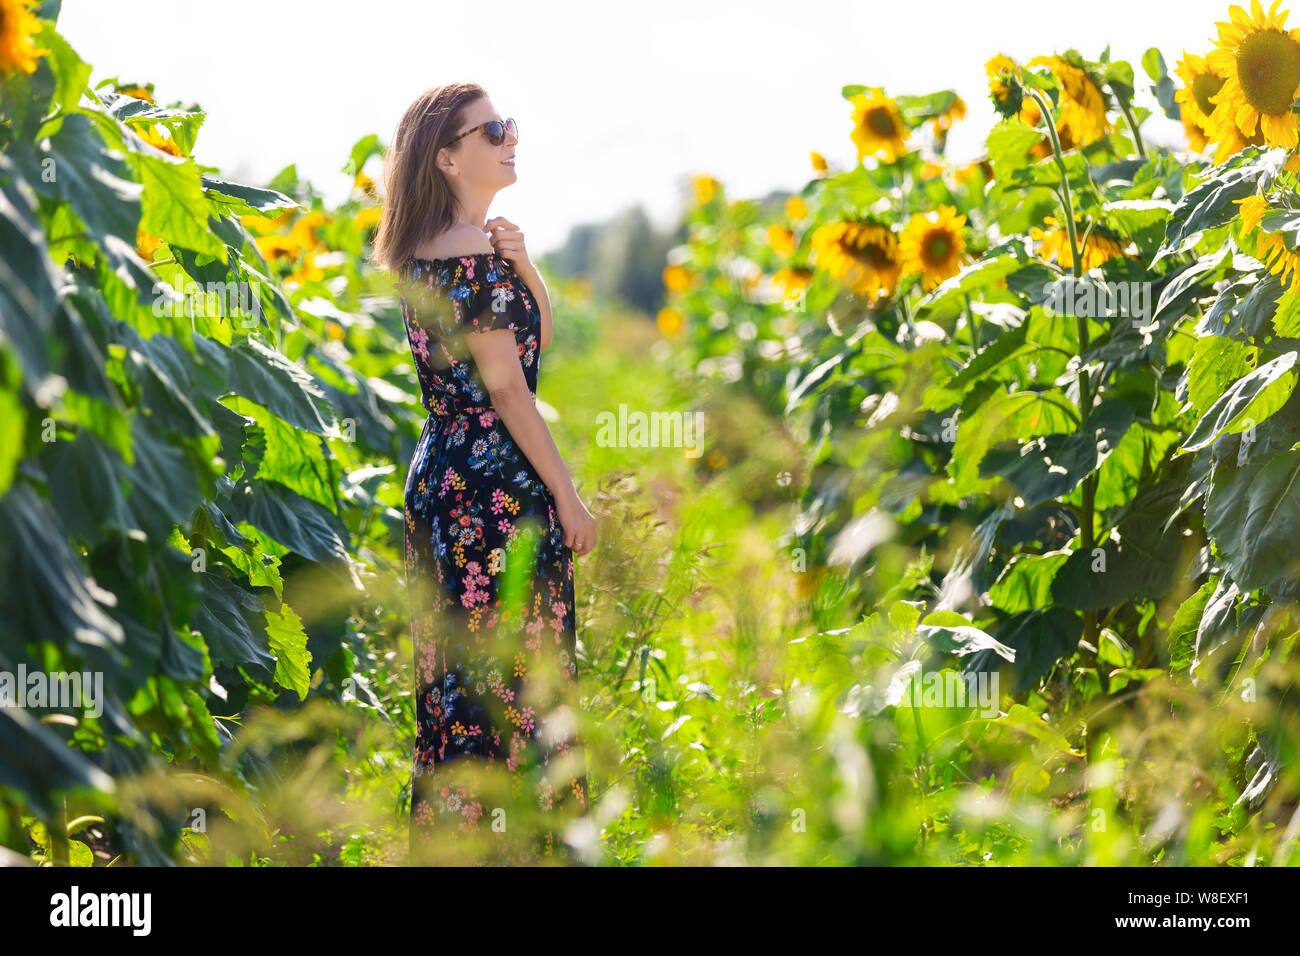 Happy woman in a field of sunflowers Stock Photo